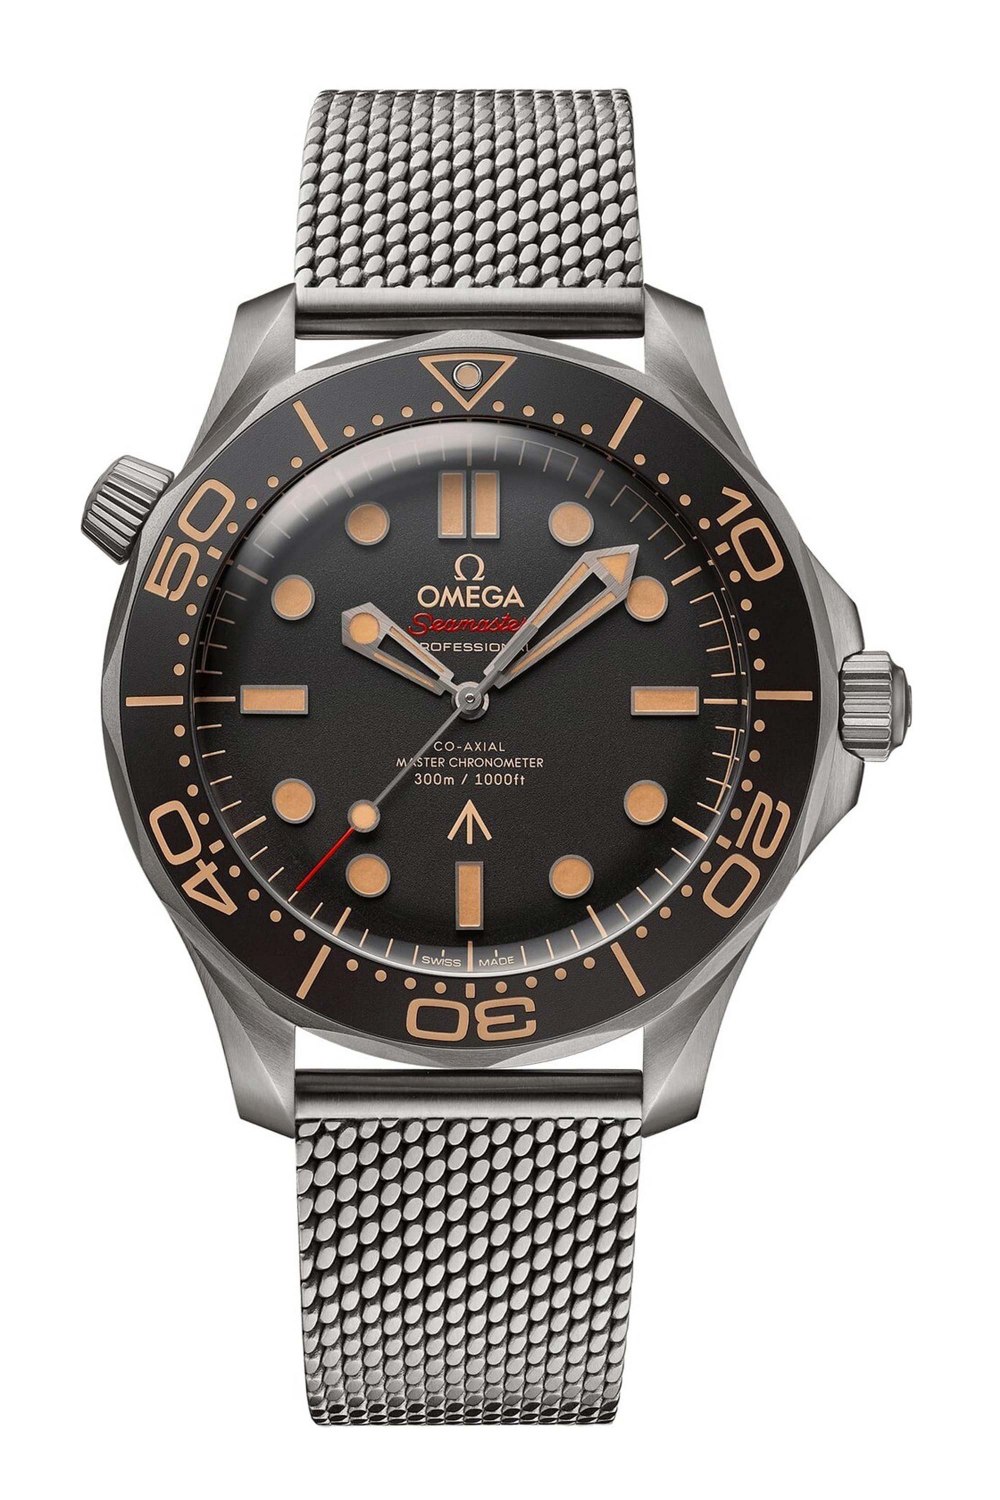 OMEGA 007 Edition Seamaster Diver 300M OMEGA Co-Axial Master Chronometer 42MM 210.90.42.20.01.001